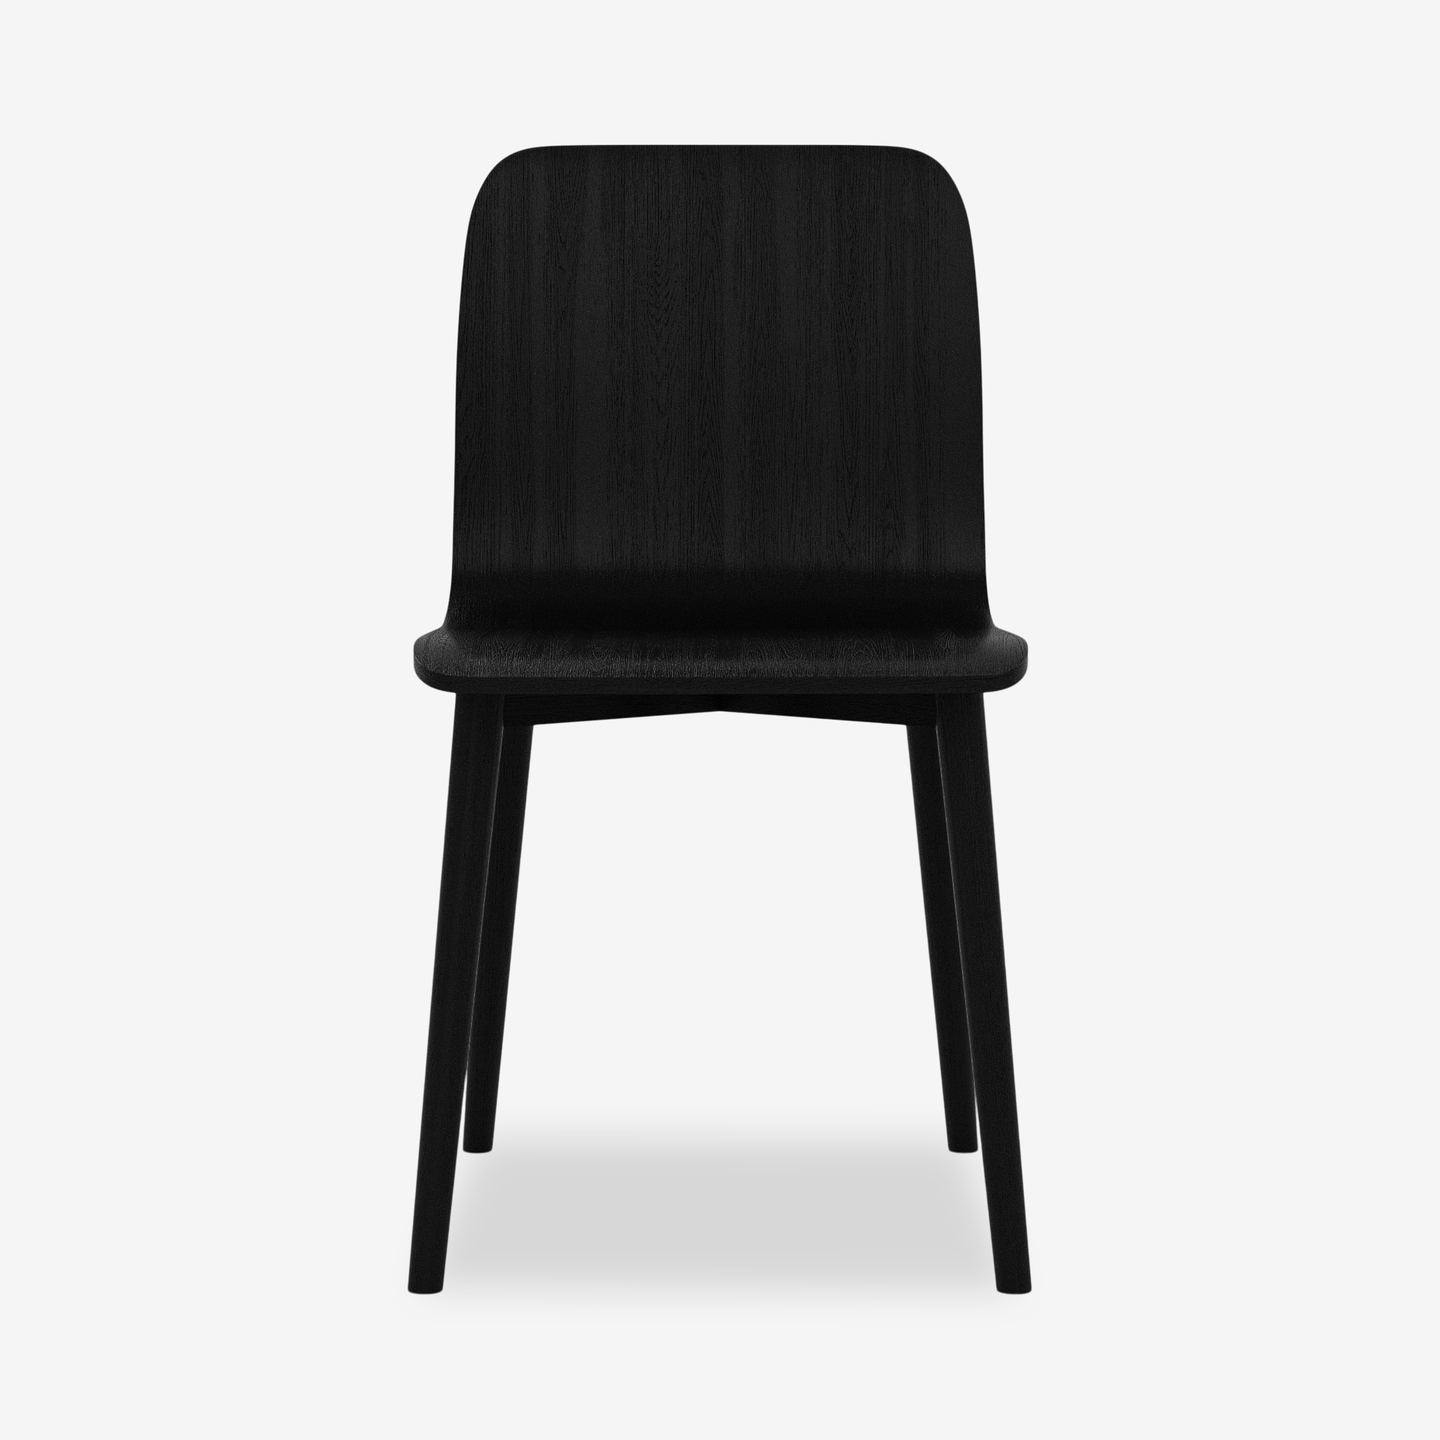 1342_Tami-Dining-Chair-Black_Front_2021.